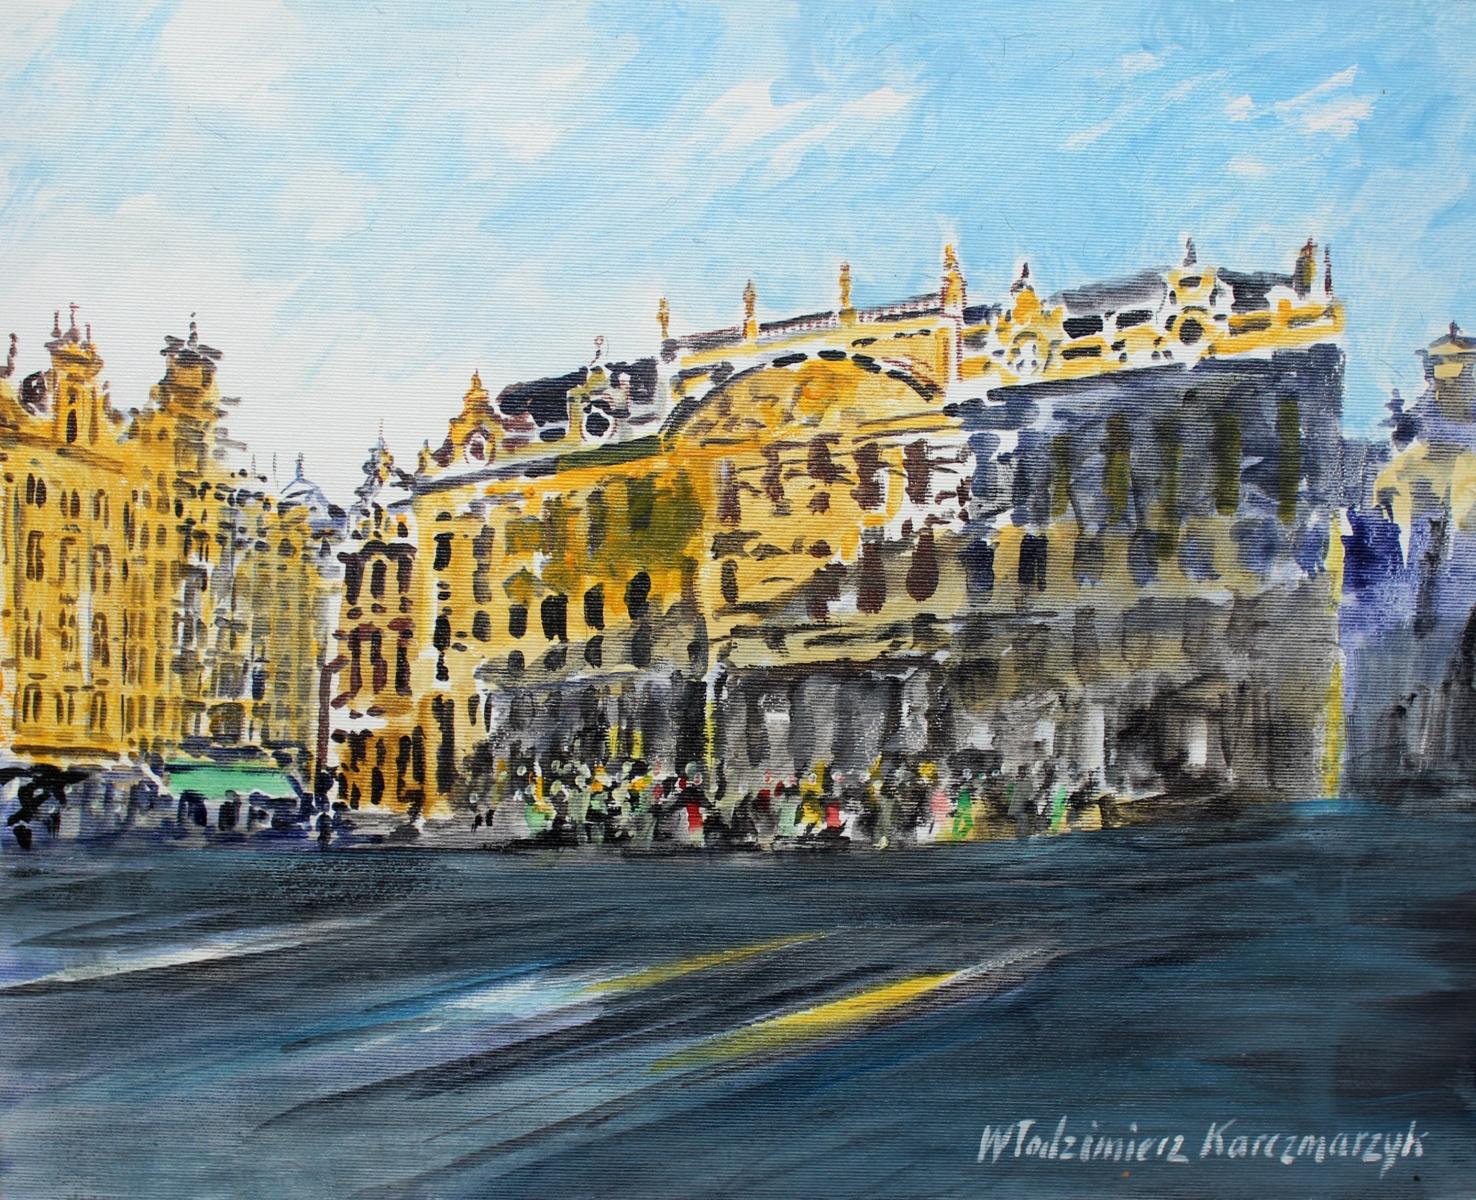 Brussels the Palace of Dukes of Brabant - 21 century Watercolor painting